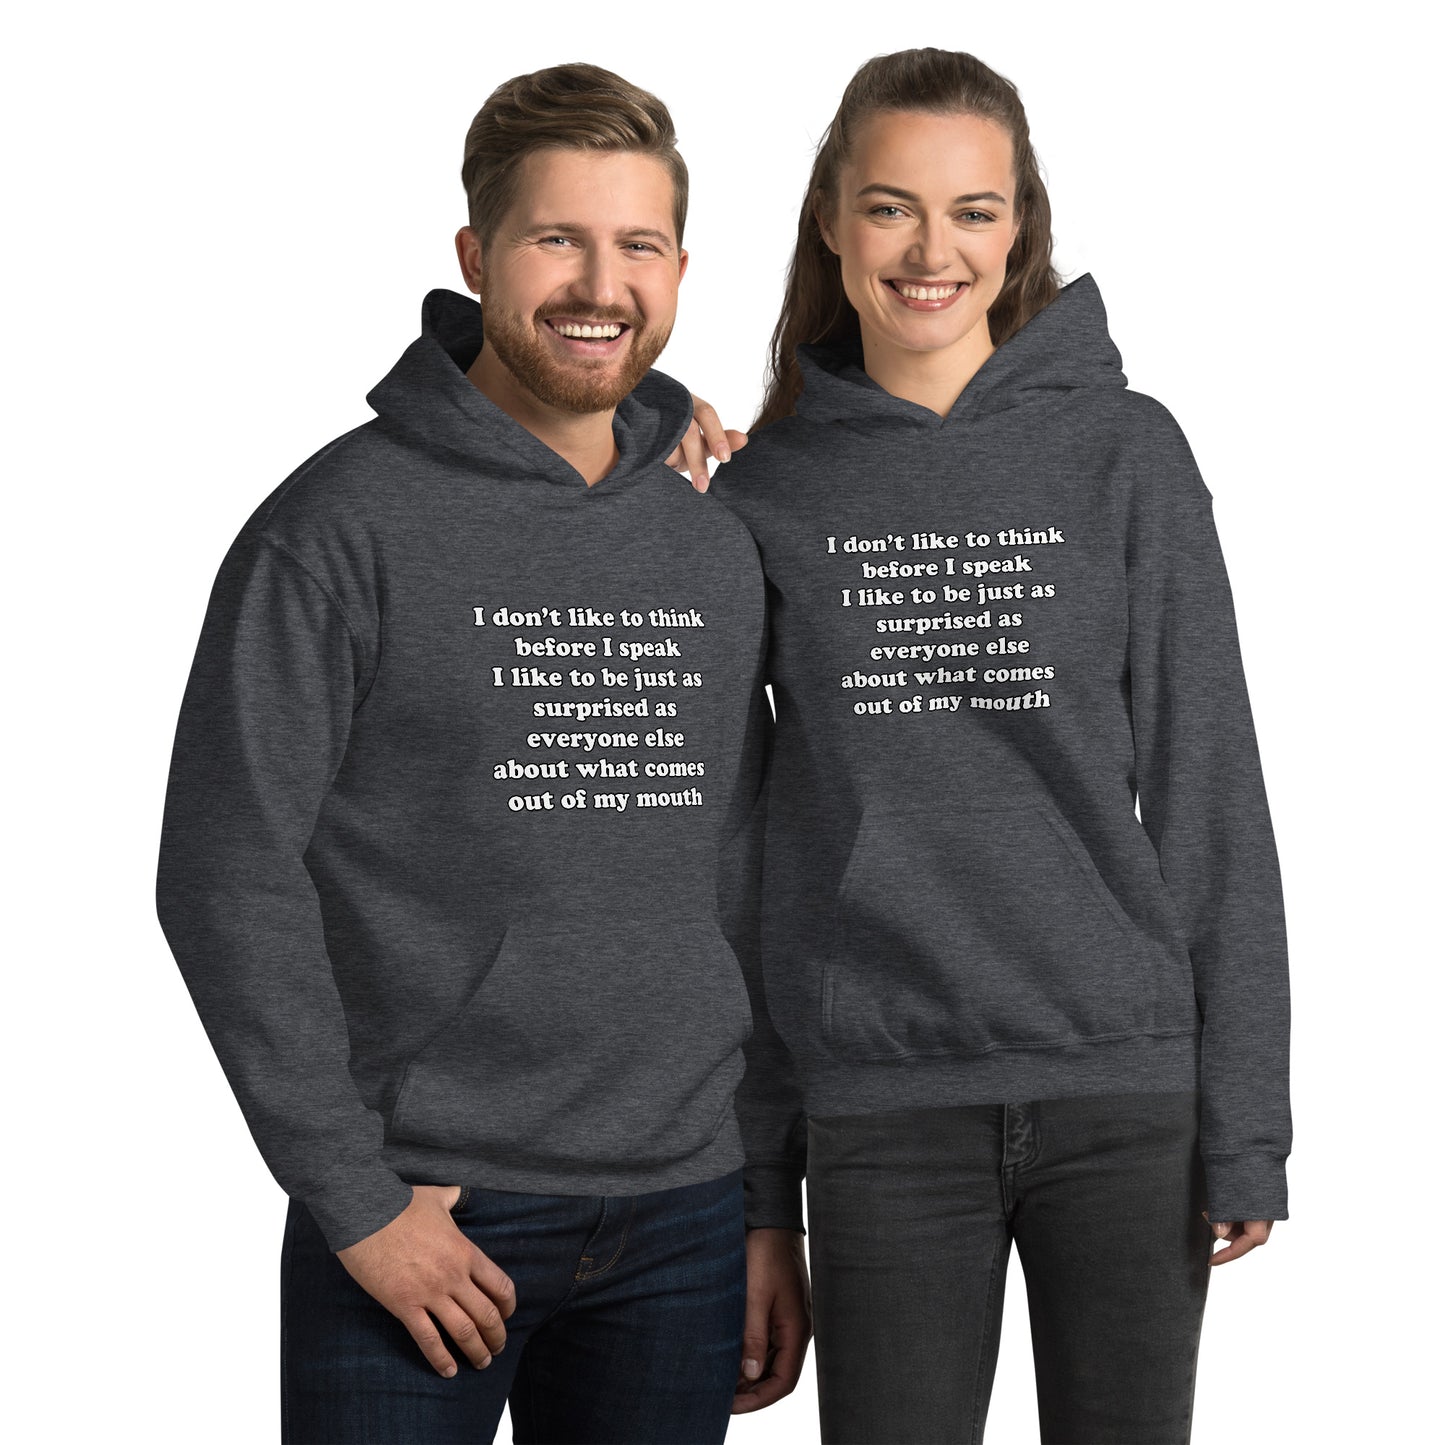 Man and woman with dark grey hoodie with text “I don't think before I speak Just as serprised as everyone about what comes out of my mouth"